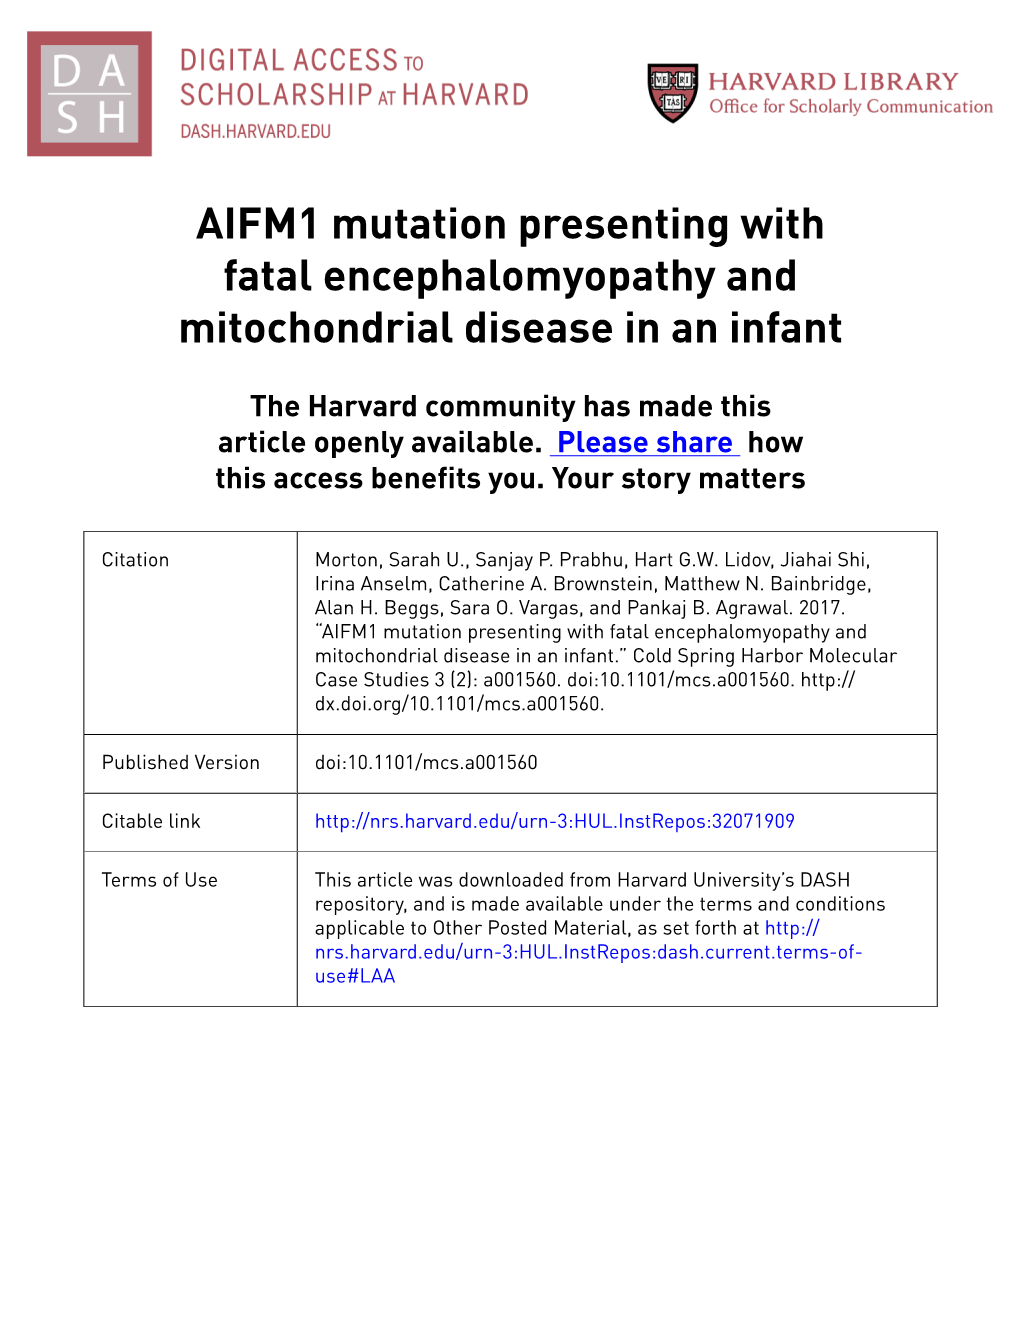 AIFM1 Mutation Presenting with Fatal Encephalomyopathy and Mitochondrial Disease in an Infant